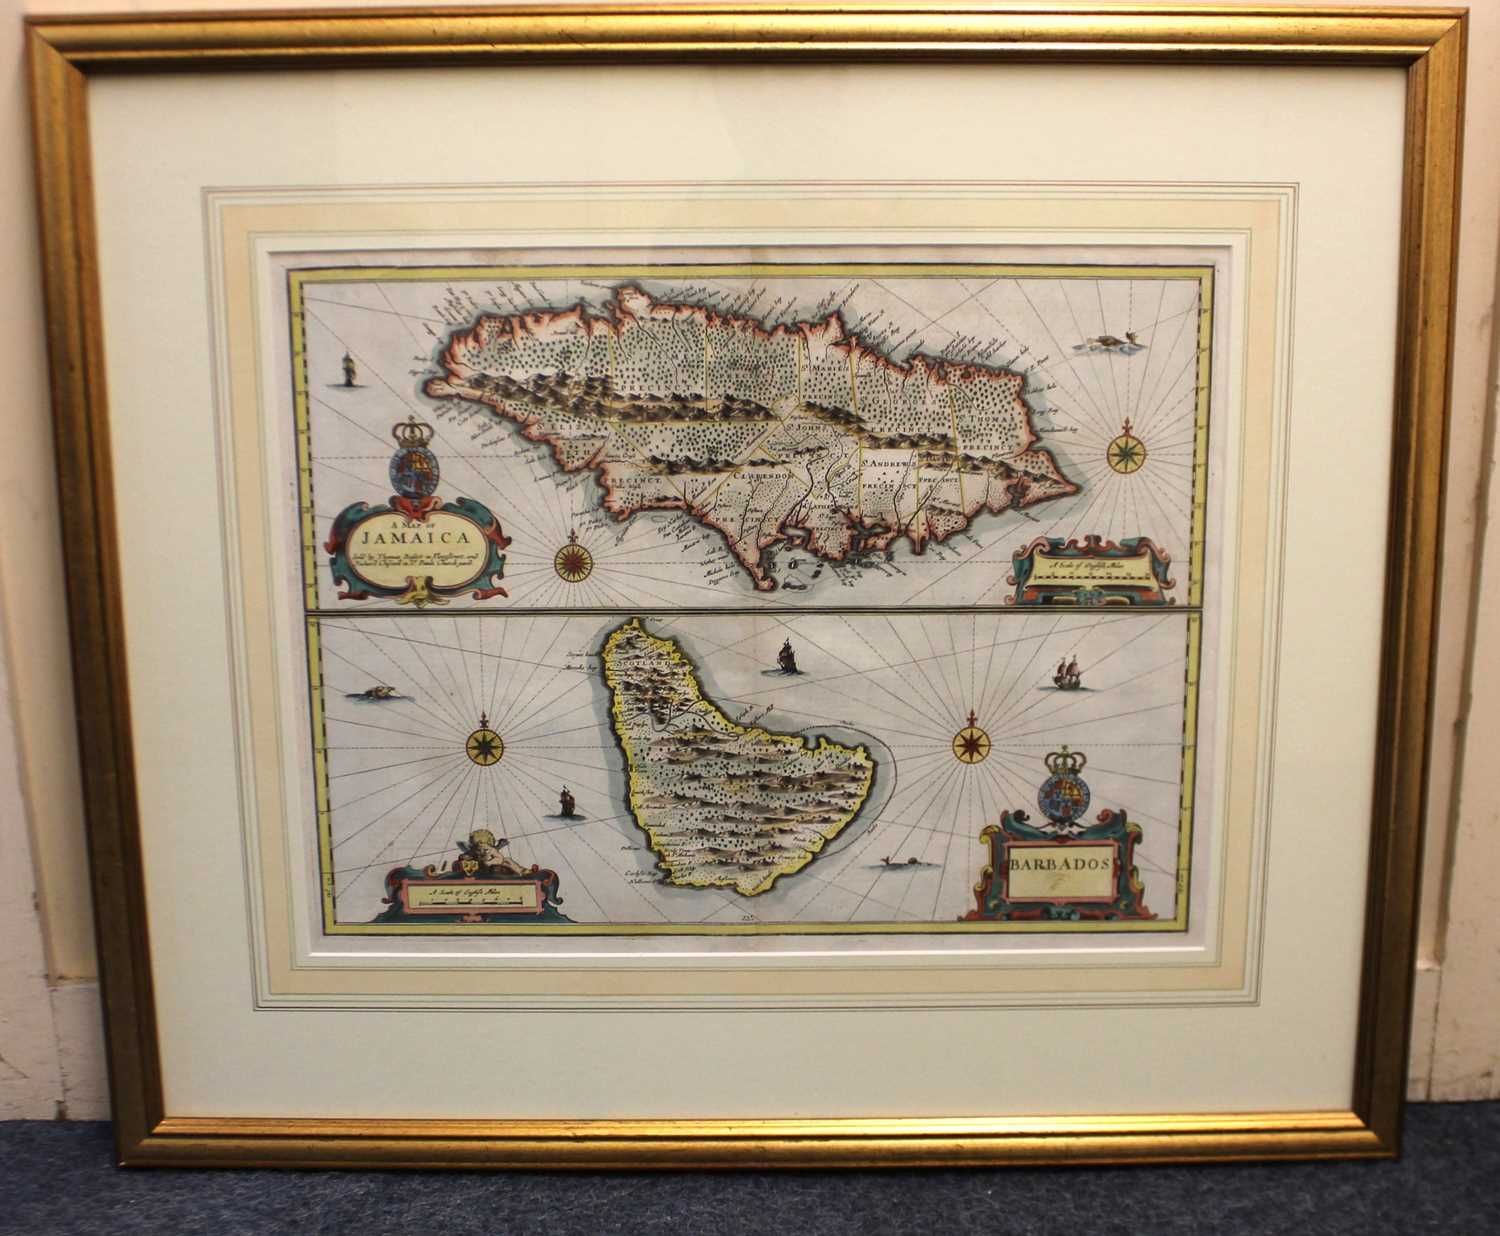 John Speed (1552-1629), a coloured map of Jamaica and Barbados, sold by Thomas Basset in Fleet